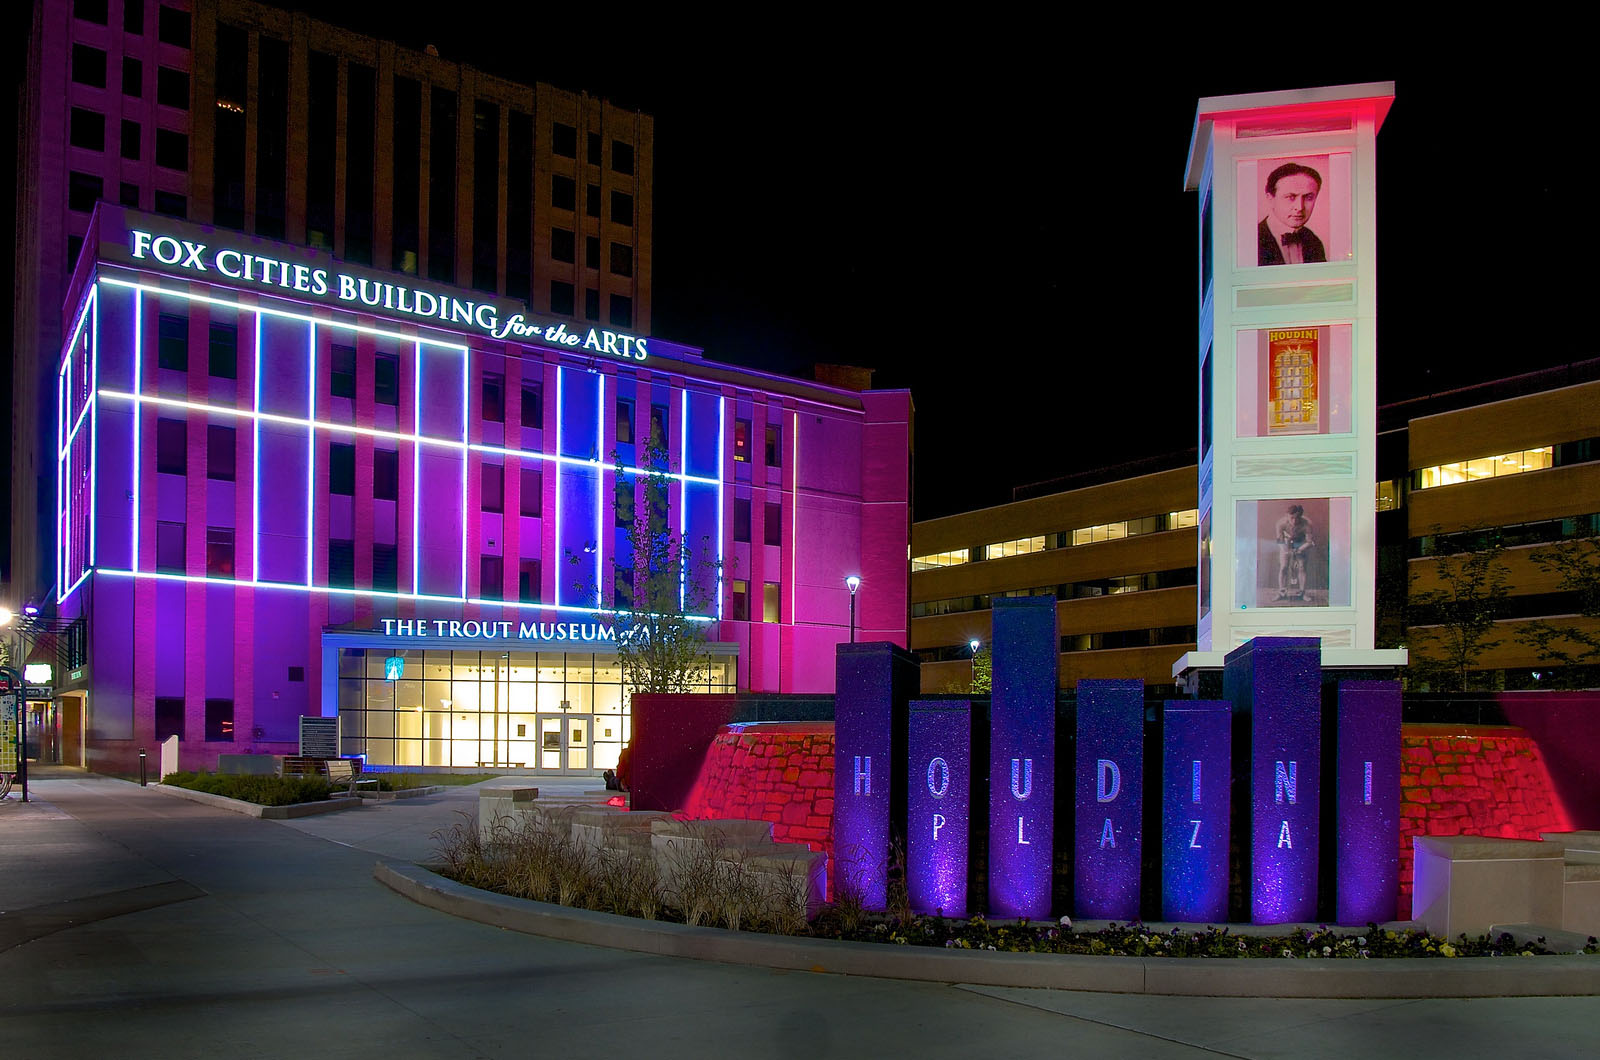 Houdini Plaza in downtown Appleton, WI lit up at night